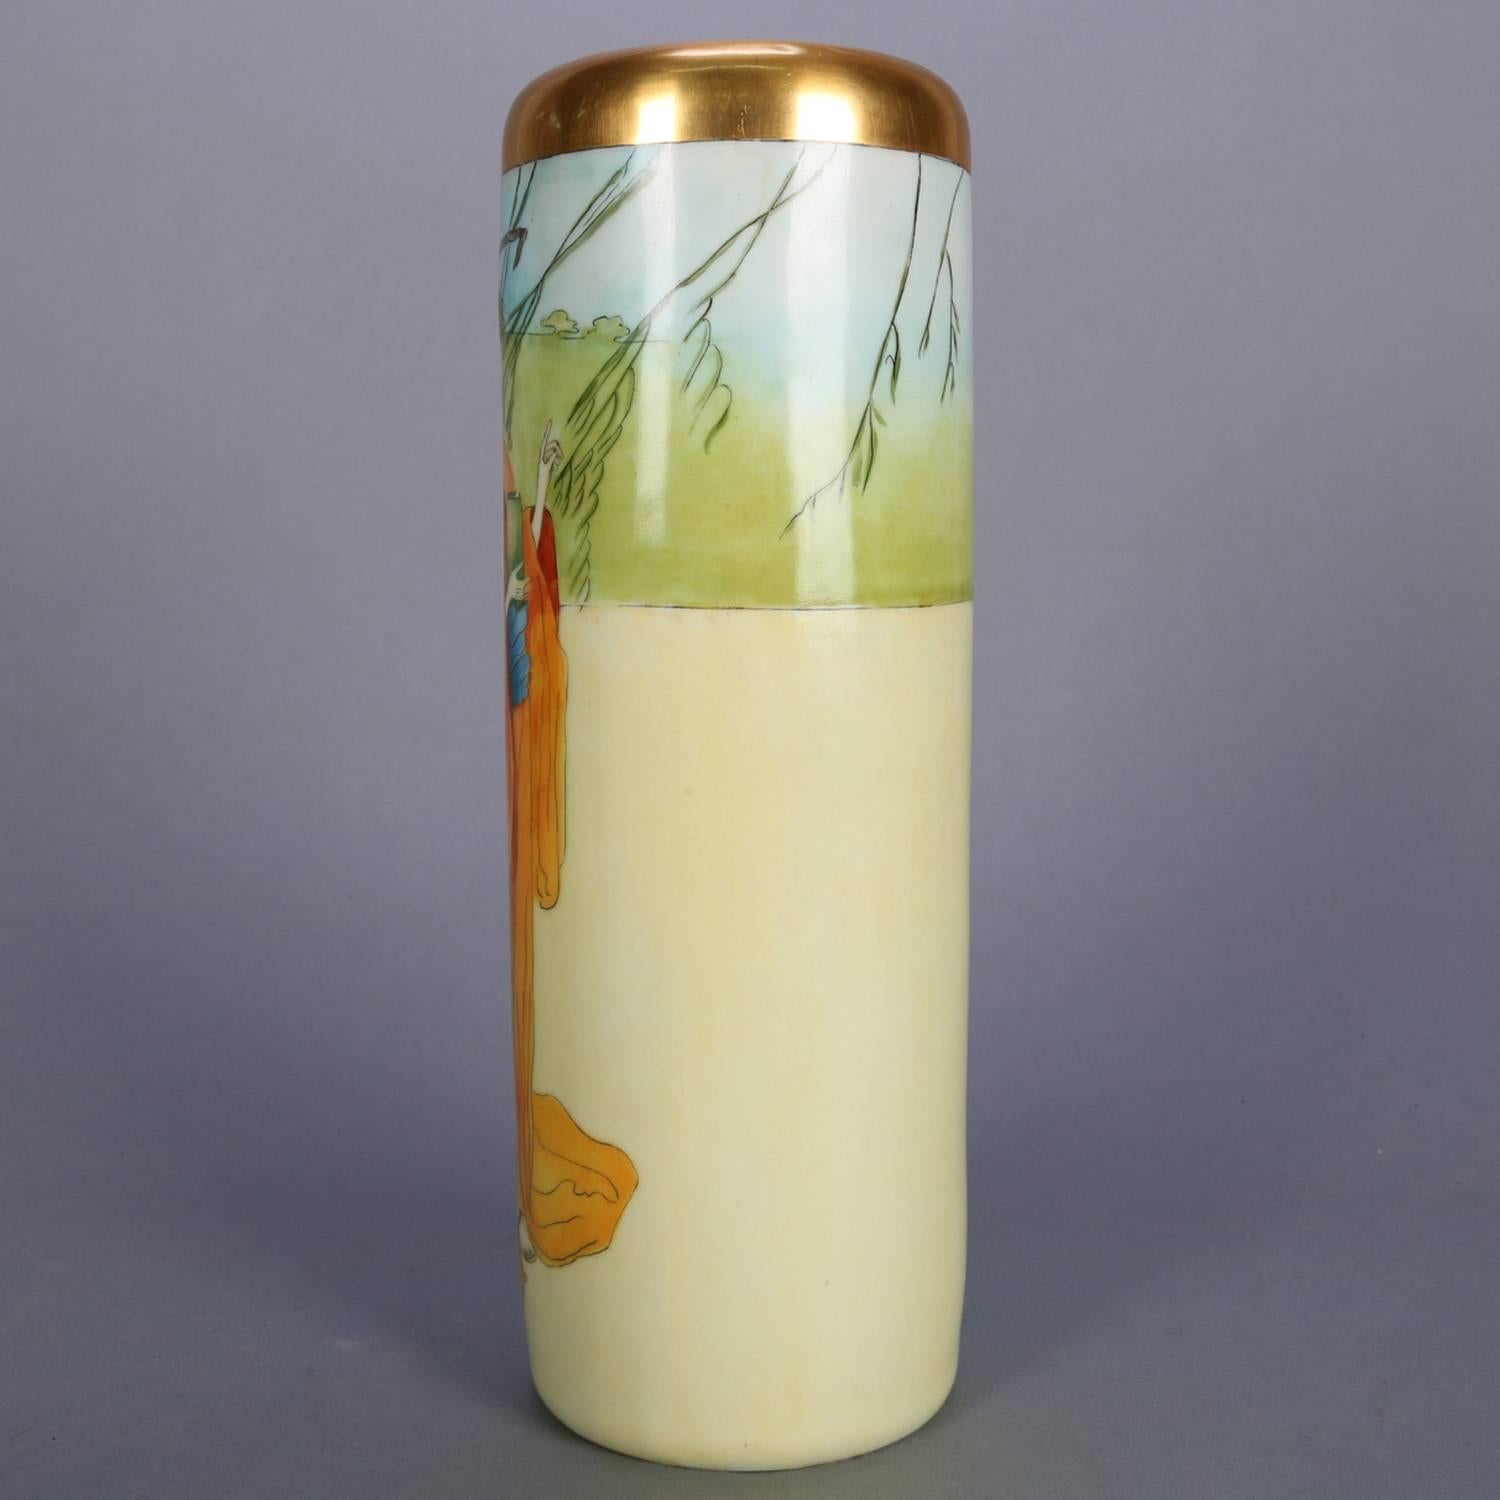 Aesthetic and Japanesque Vienna Austrian porcelain portrait vase features cylindrical form with hand-painted full length portrait of Japanese woman in kimono, gilt highlights, elements of Arts & Crafts era, 20th century

Measures - 12.5